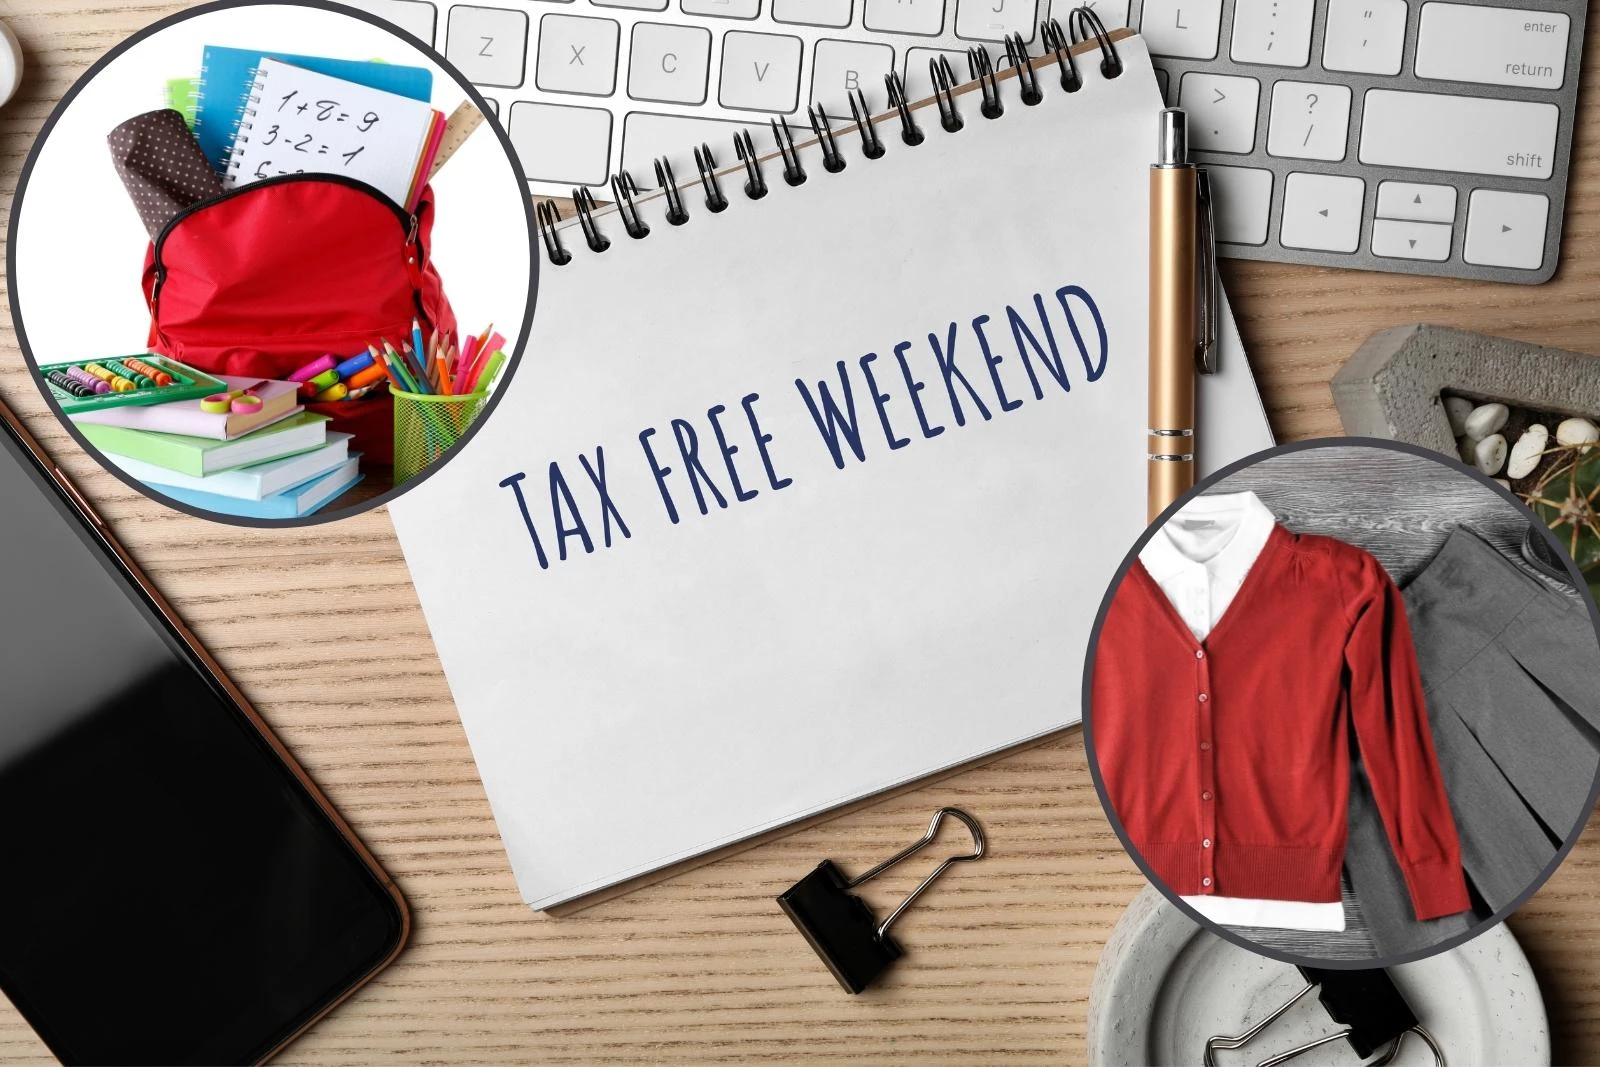 TaxFree Weekend In Texas Is Coming Up This Weekend